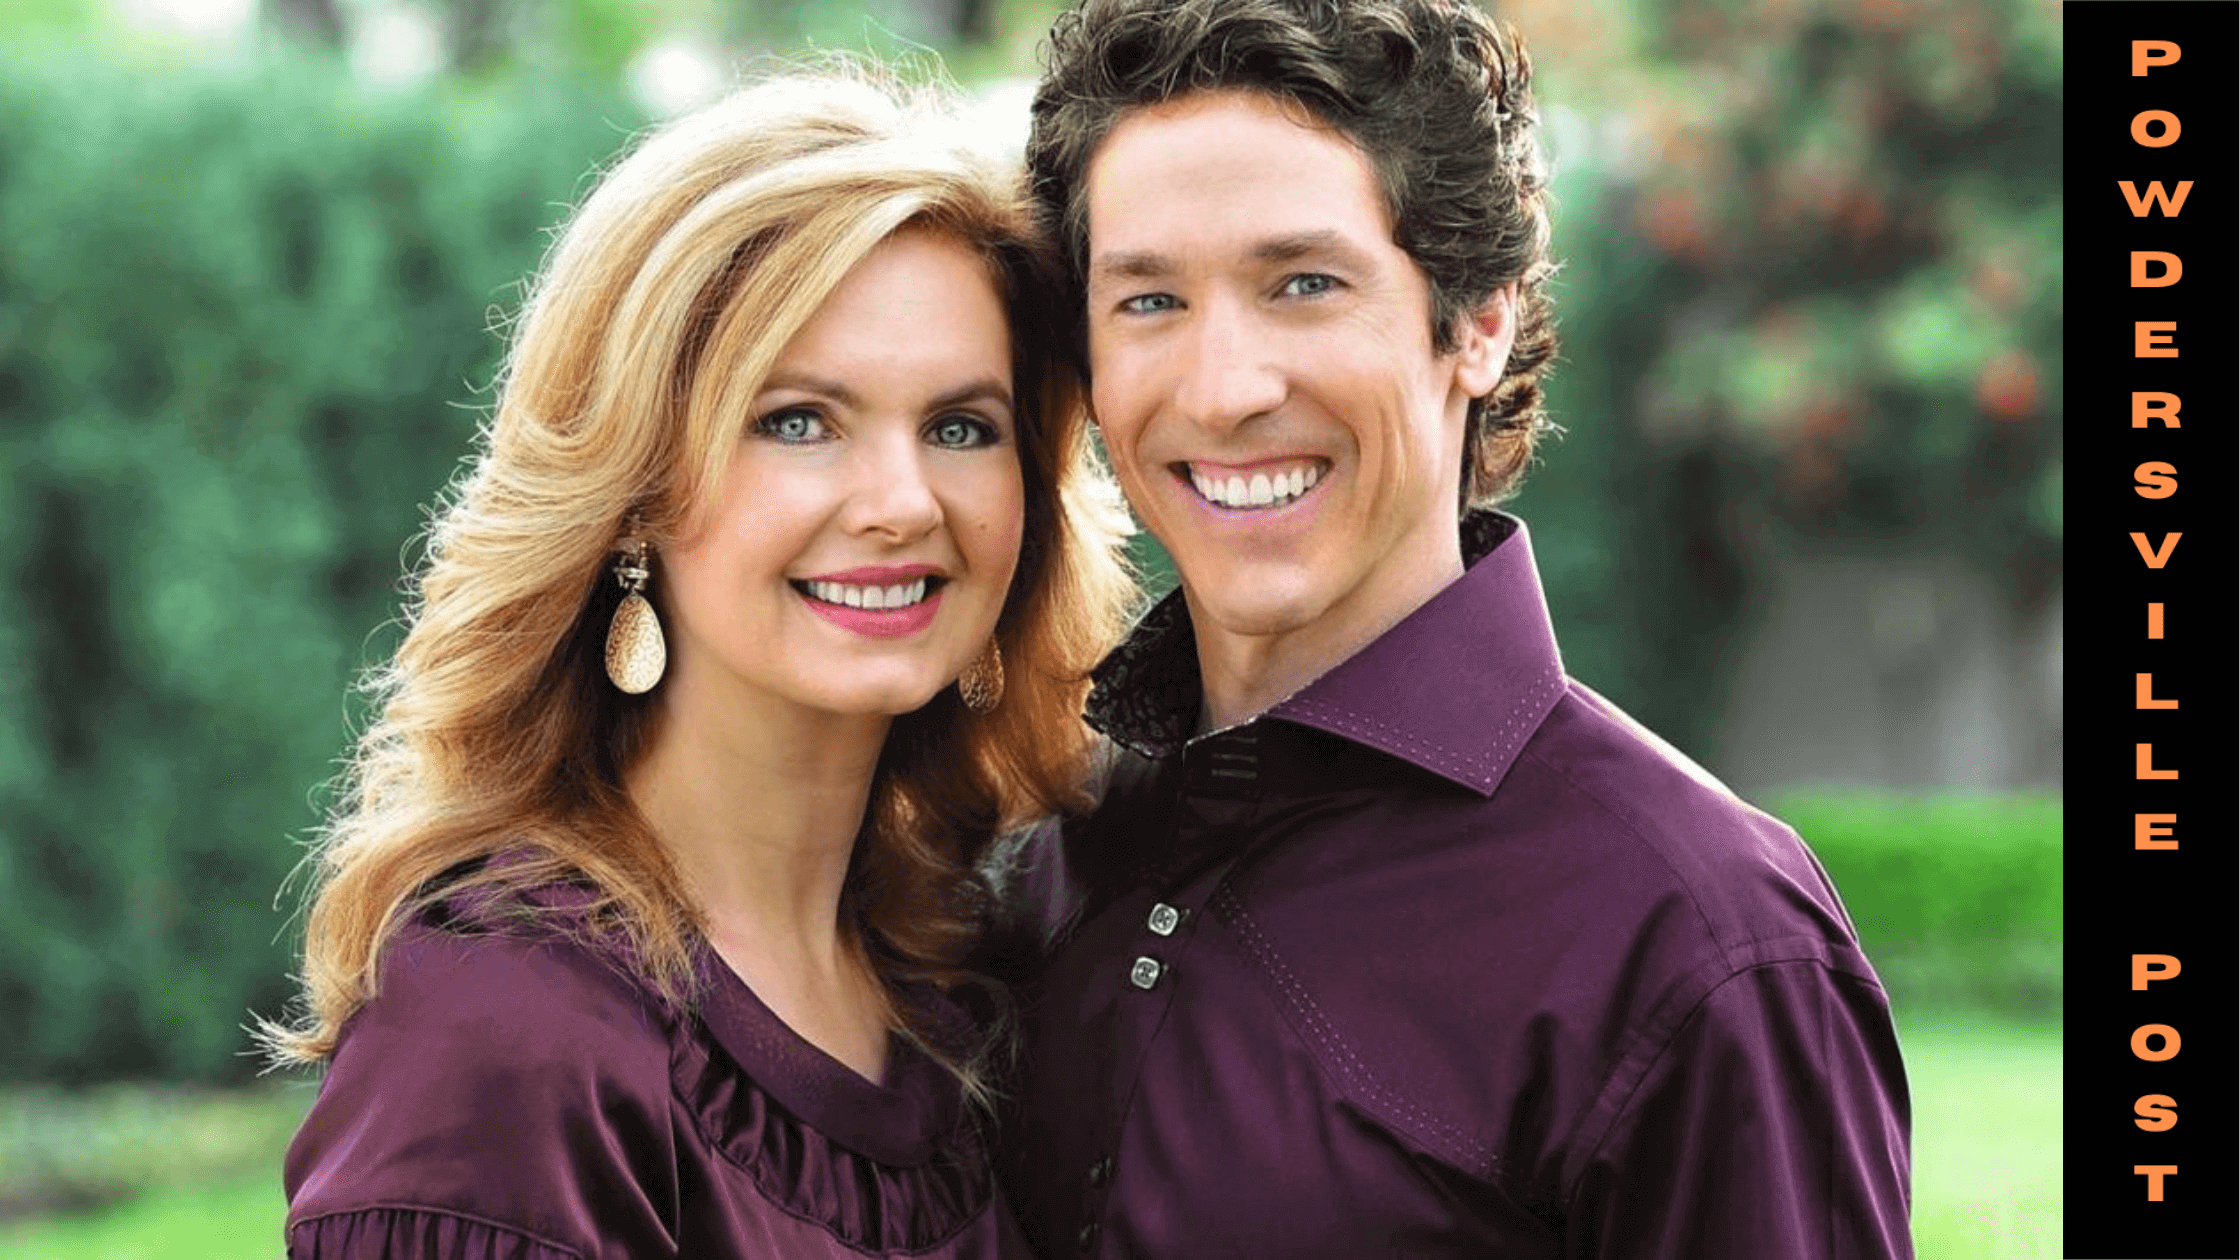 Are Joel Osteen And Victoria Osteen Going To Get Divorced? Is Their Marriage Life Over?